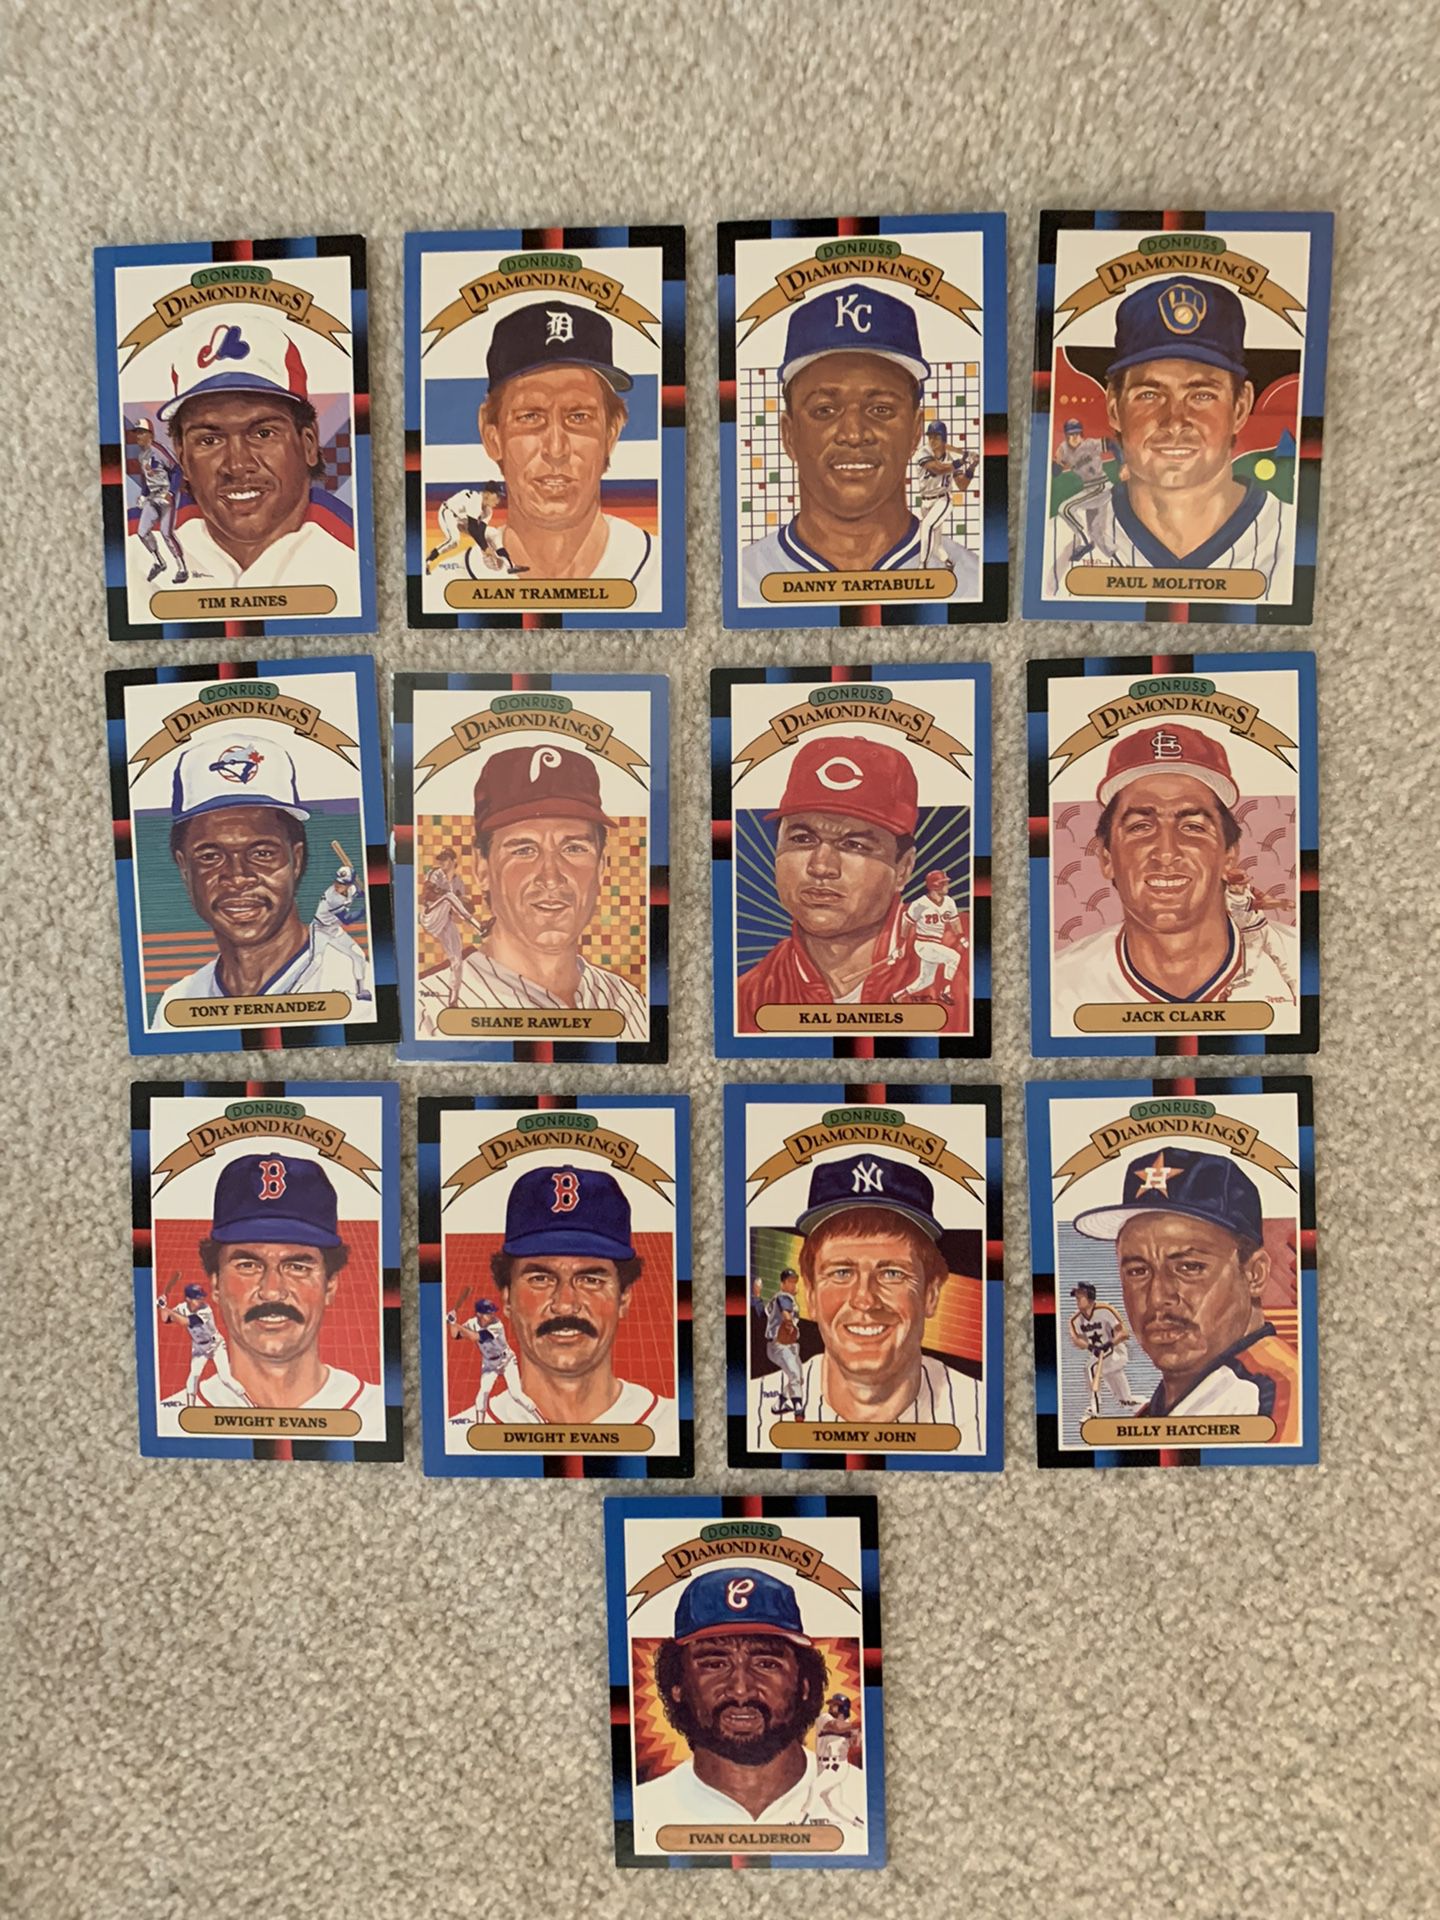 DONRUSS DIAMOND KINGS from 1988, 1989 and 1986==33 Cards incl Coleman, Bonilla, Molitor, John, TPerez & Gooden among other great players!